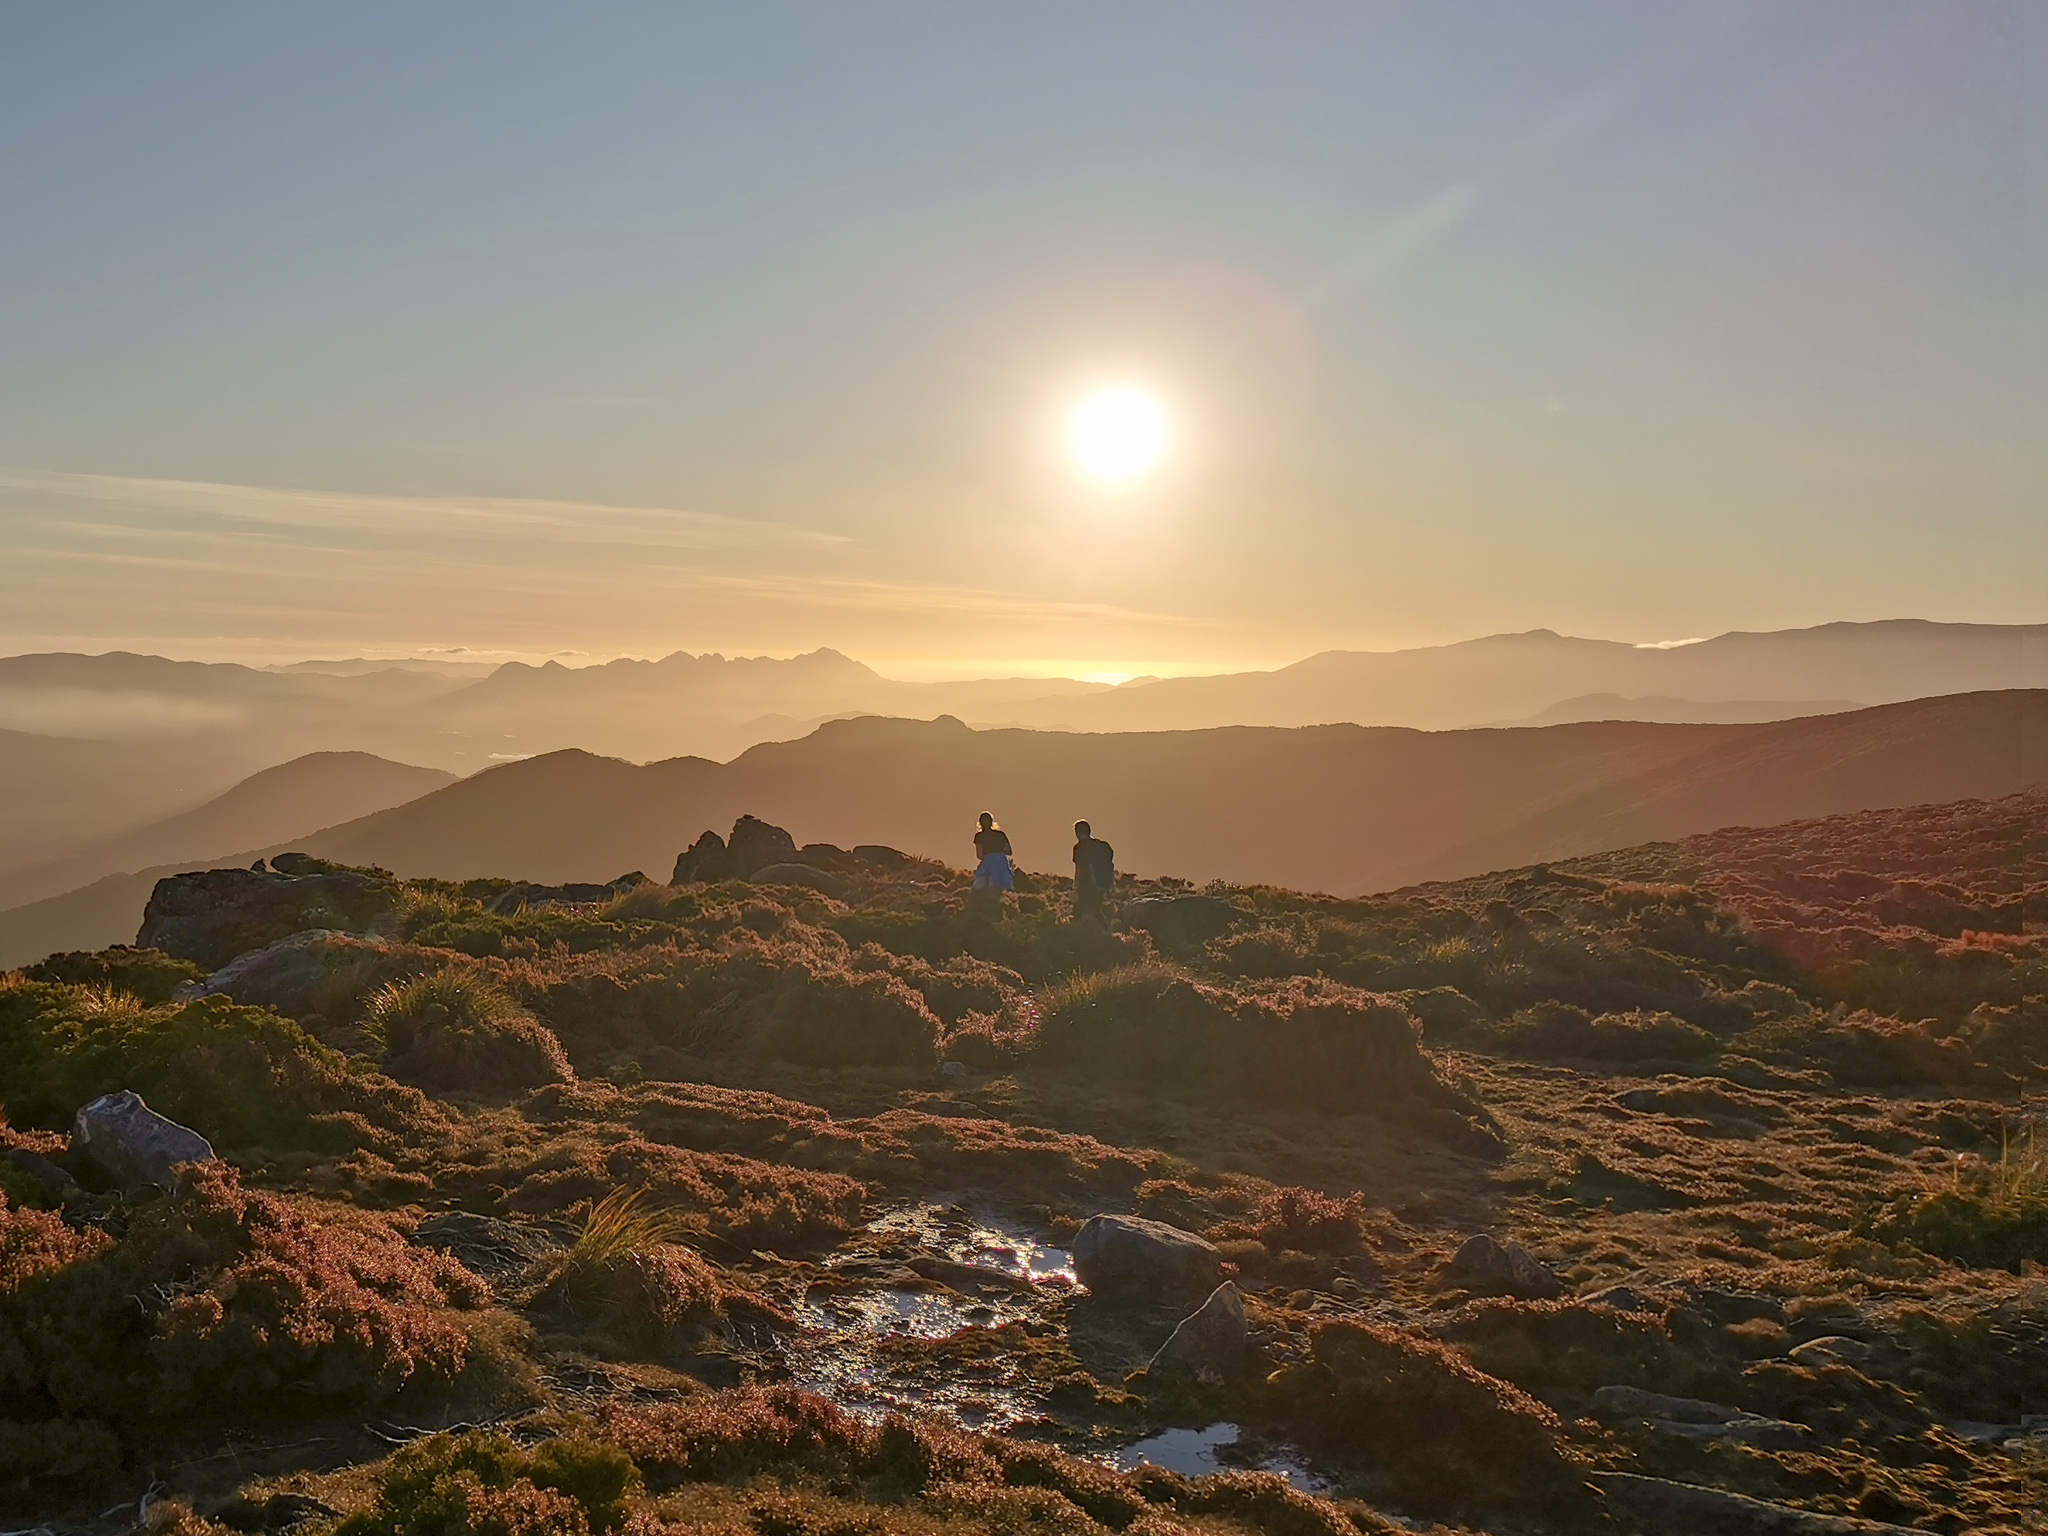 Two hikers walking into the sunset with ridge lines fading into the background